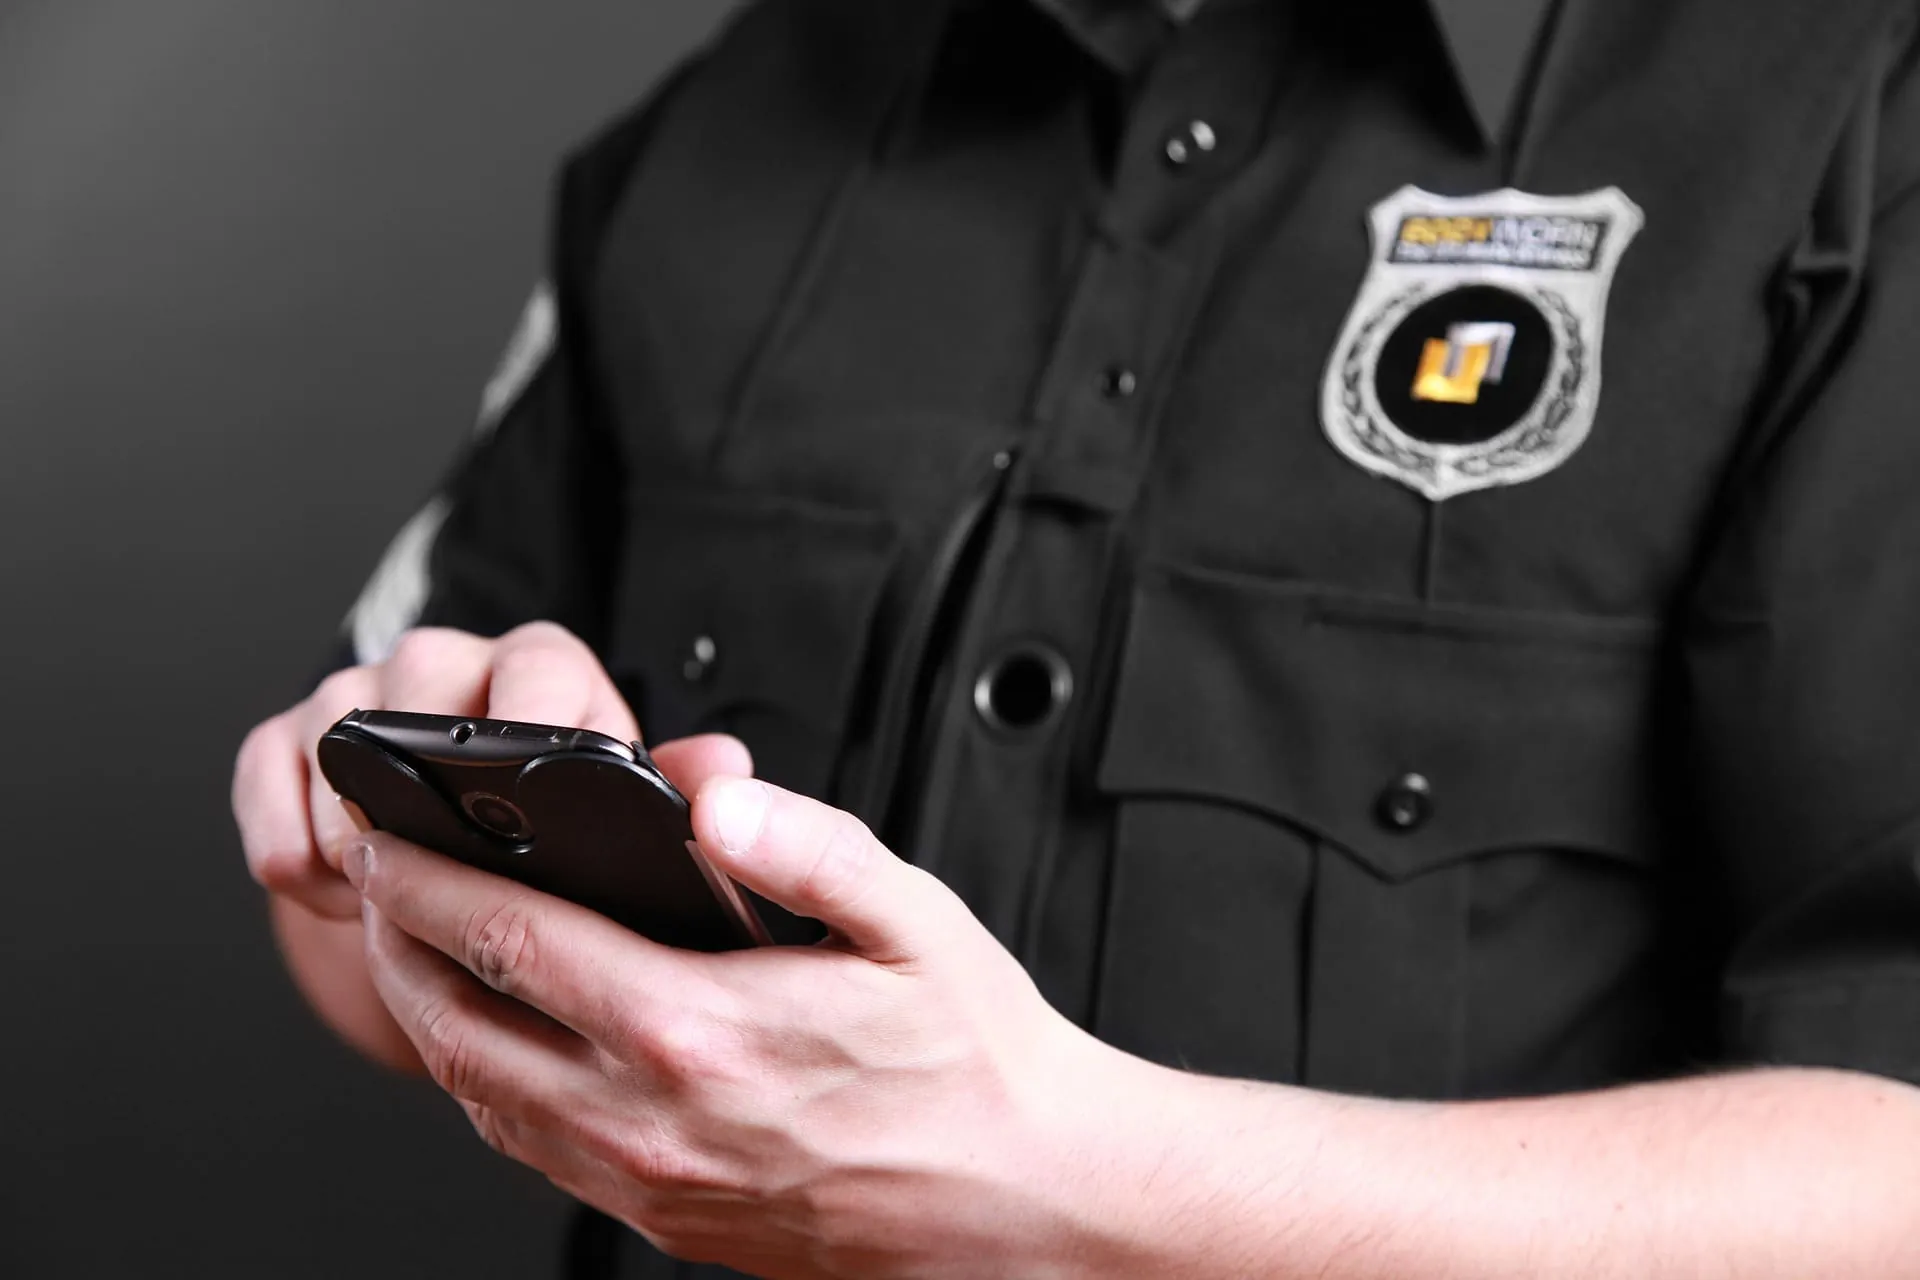 Can New York Police Have the Right to Search My Phone During a Traffic Stop?